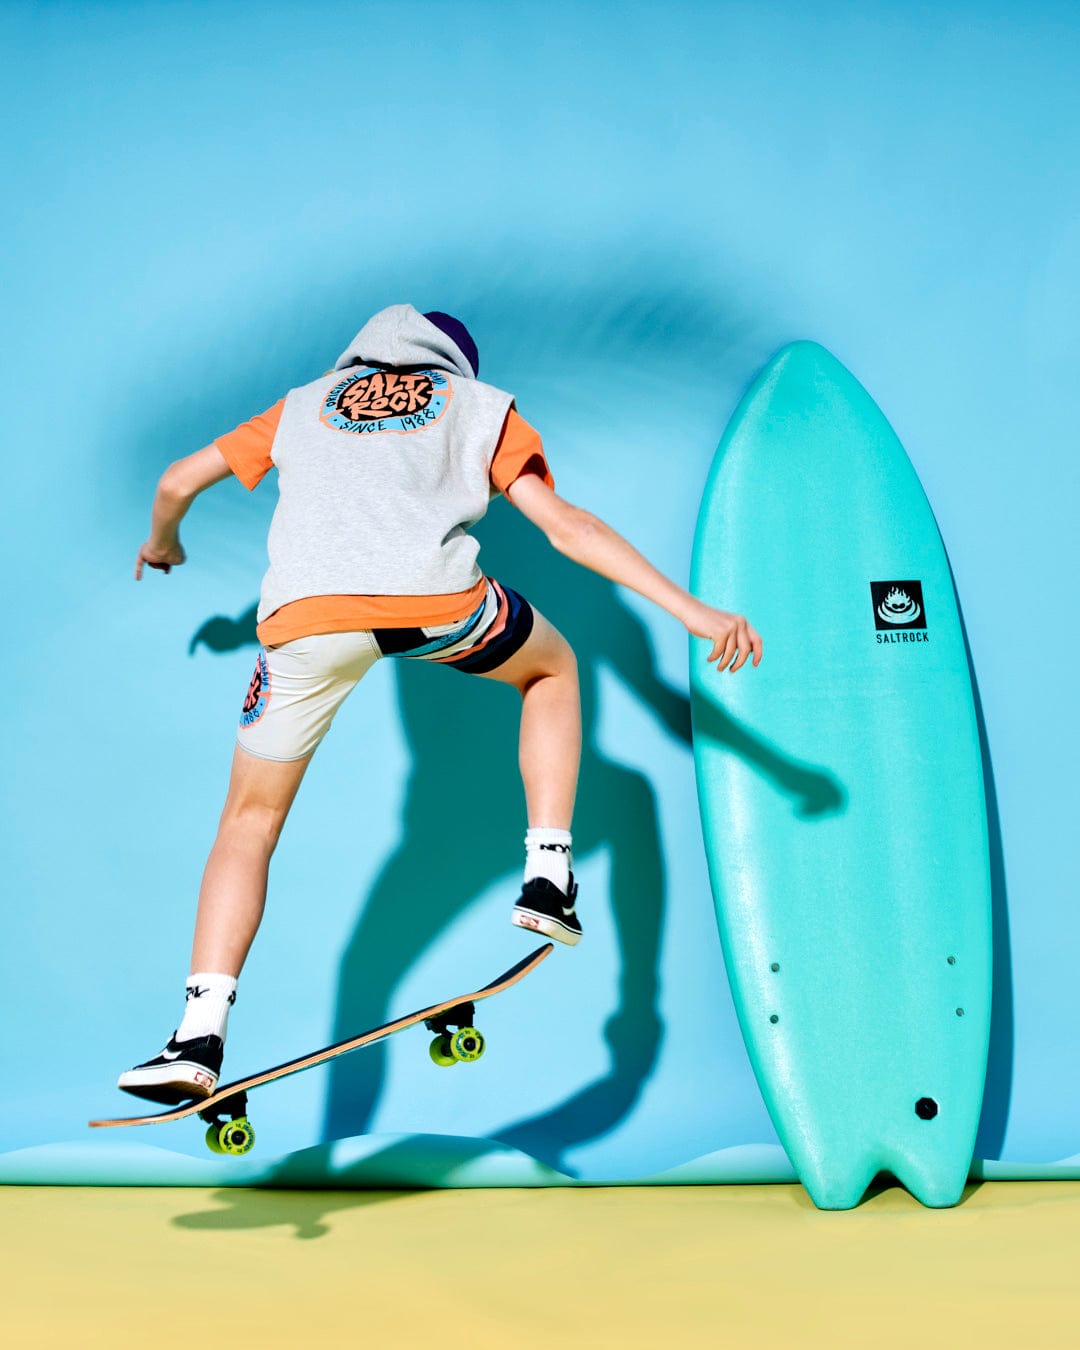 A person in a Saltrock SR Original - Kids Sleeveless Pop Hoodie - Grey and shorts is mid-air on a skateboard. A turquoise surfboard stands upright against a bright blue background.